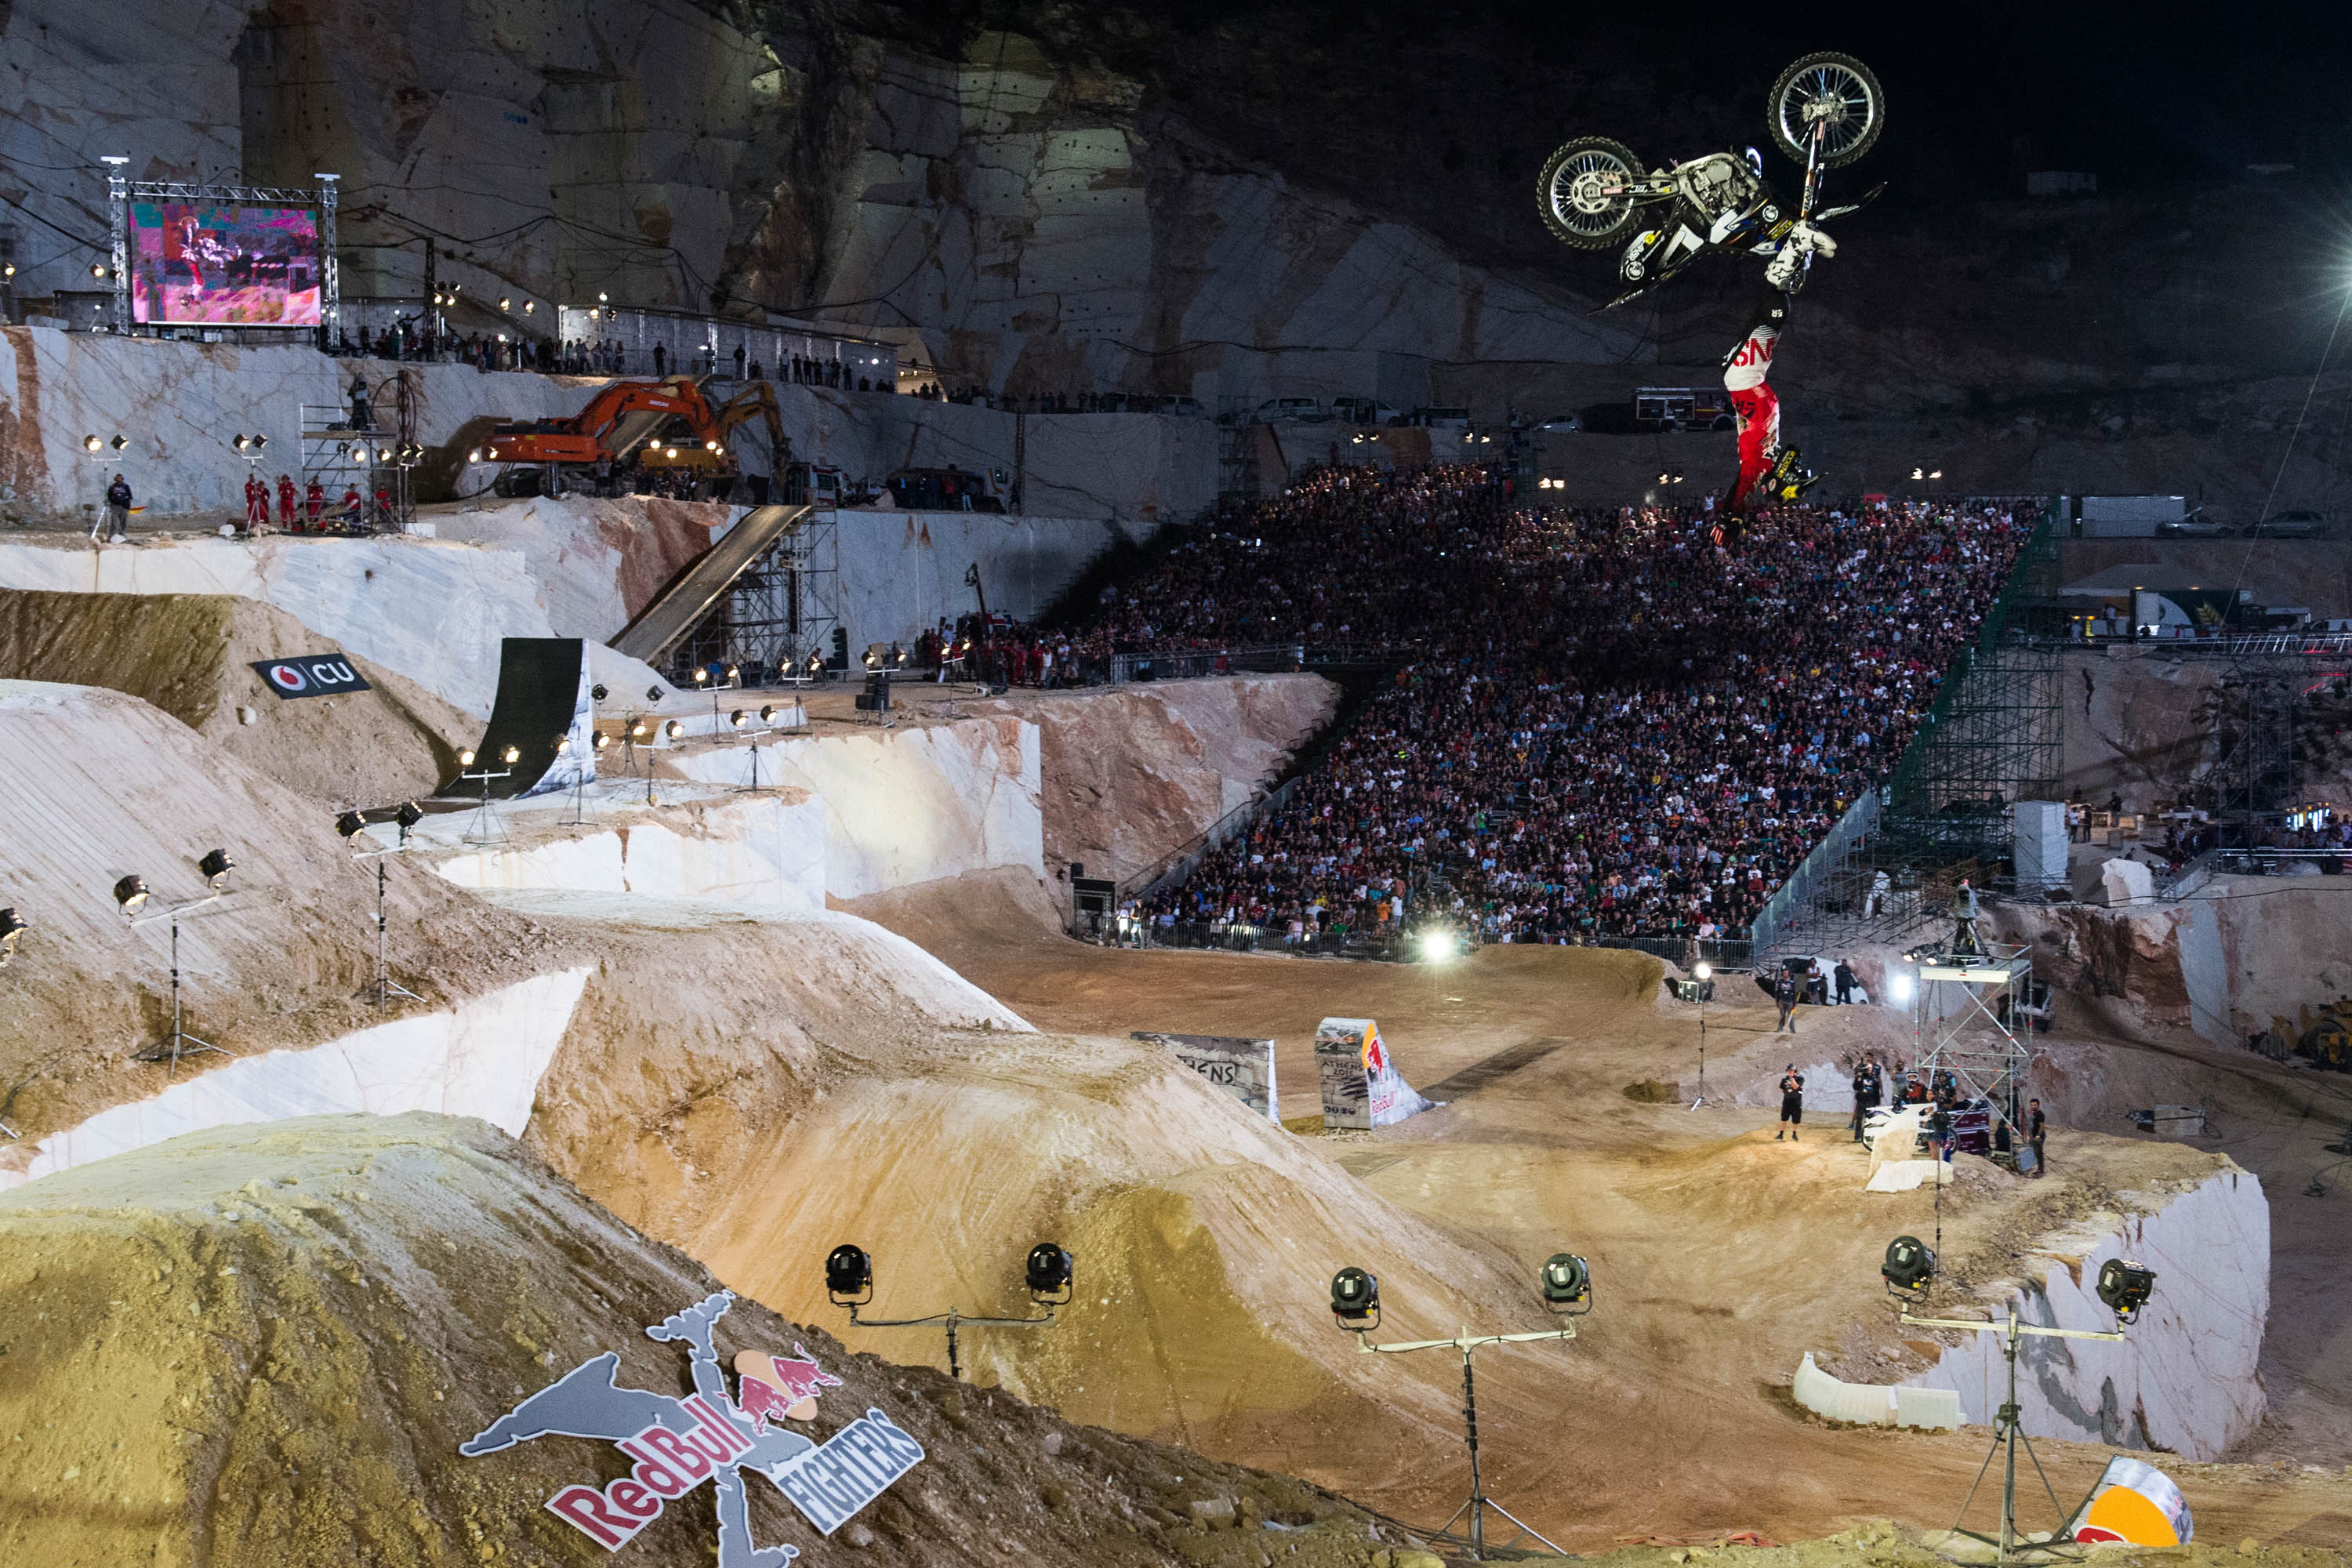 Rob Adelberg of the United States performs during the finals of the second stop of the Red Bull X-Fighters World Tour at the Dionyssos Marble Quarry in Athens, Greece on June 12, 2015.